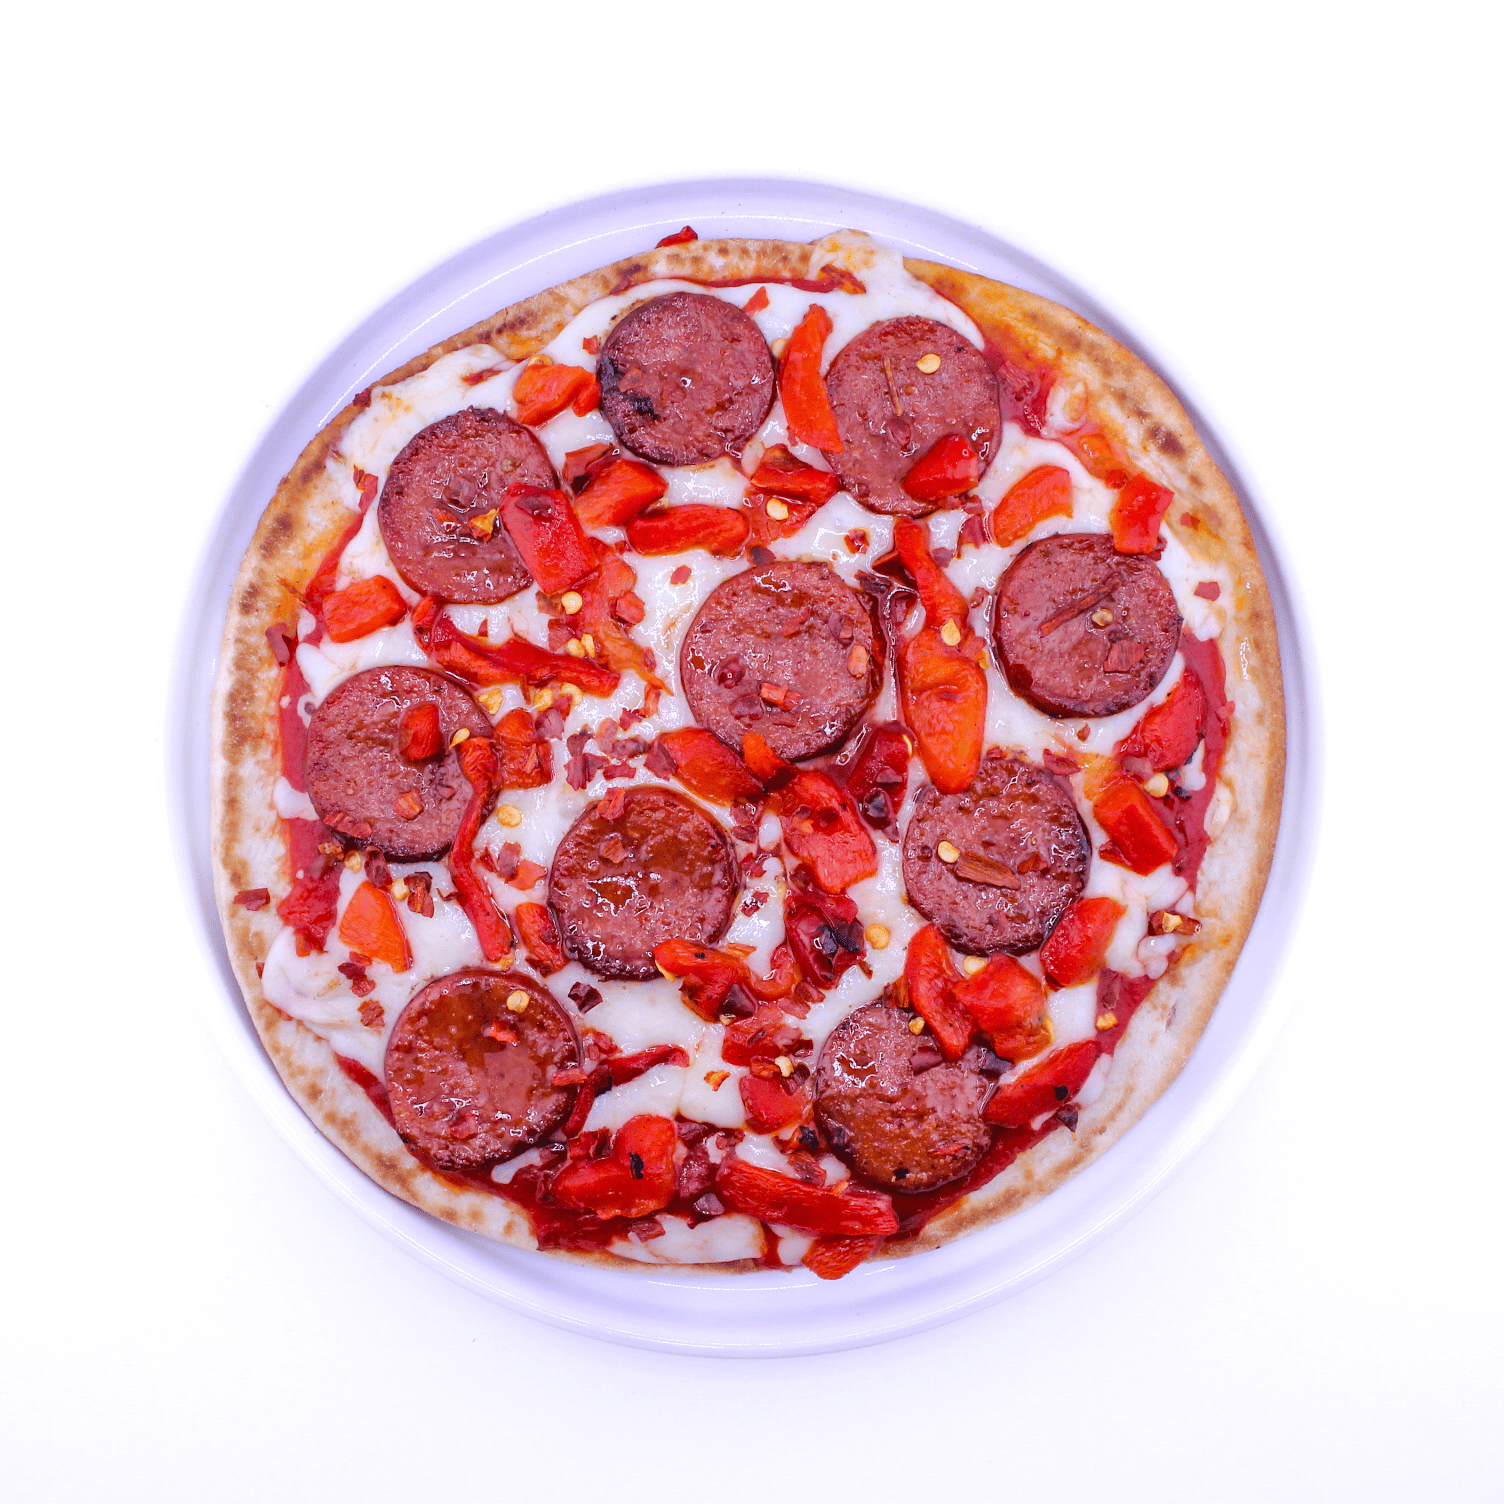 P&P - Pepperoni, roasted red peppers, red pepper flakes, honey, tomato sauce, mozzarella cheese, whole wheat flatbread